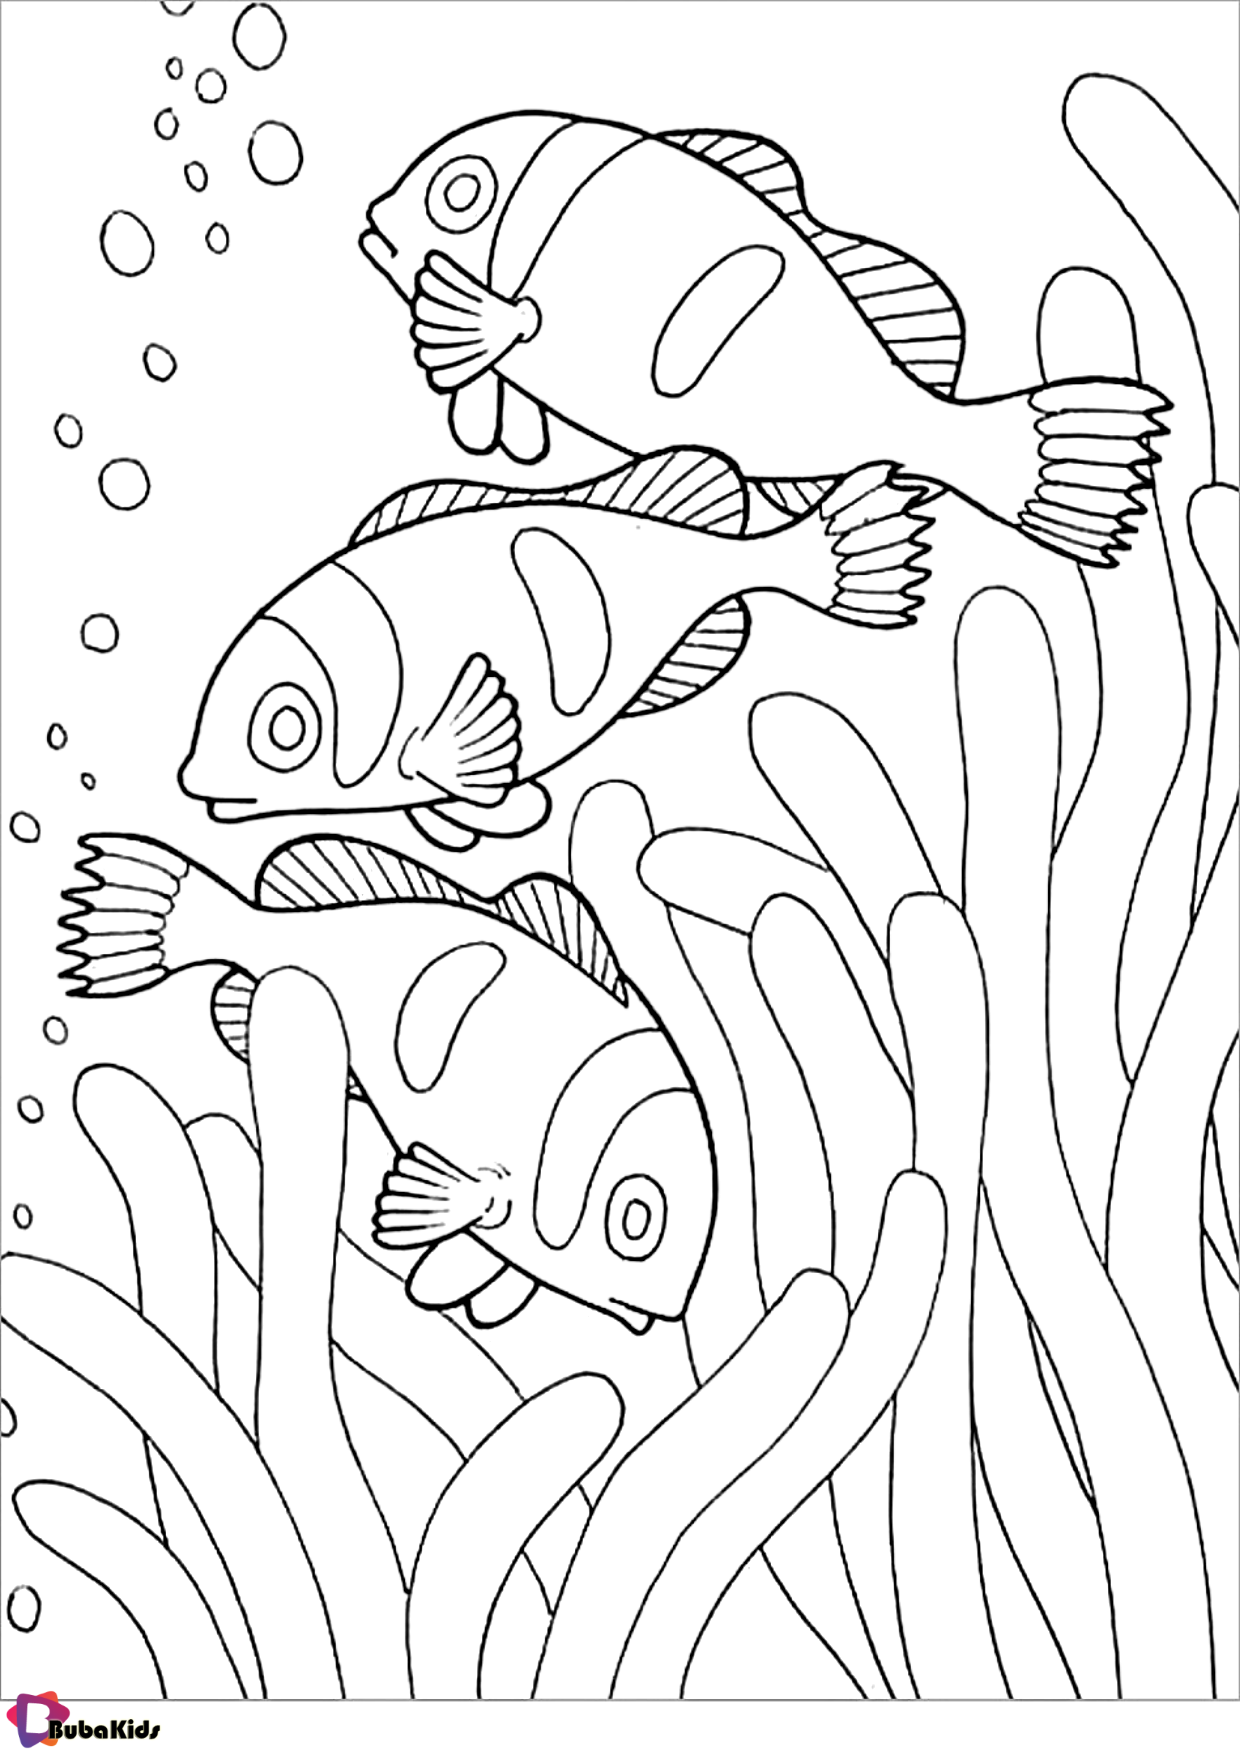 Clown fish and sea weed coloring page Wallpaper